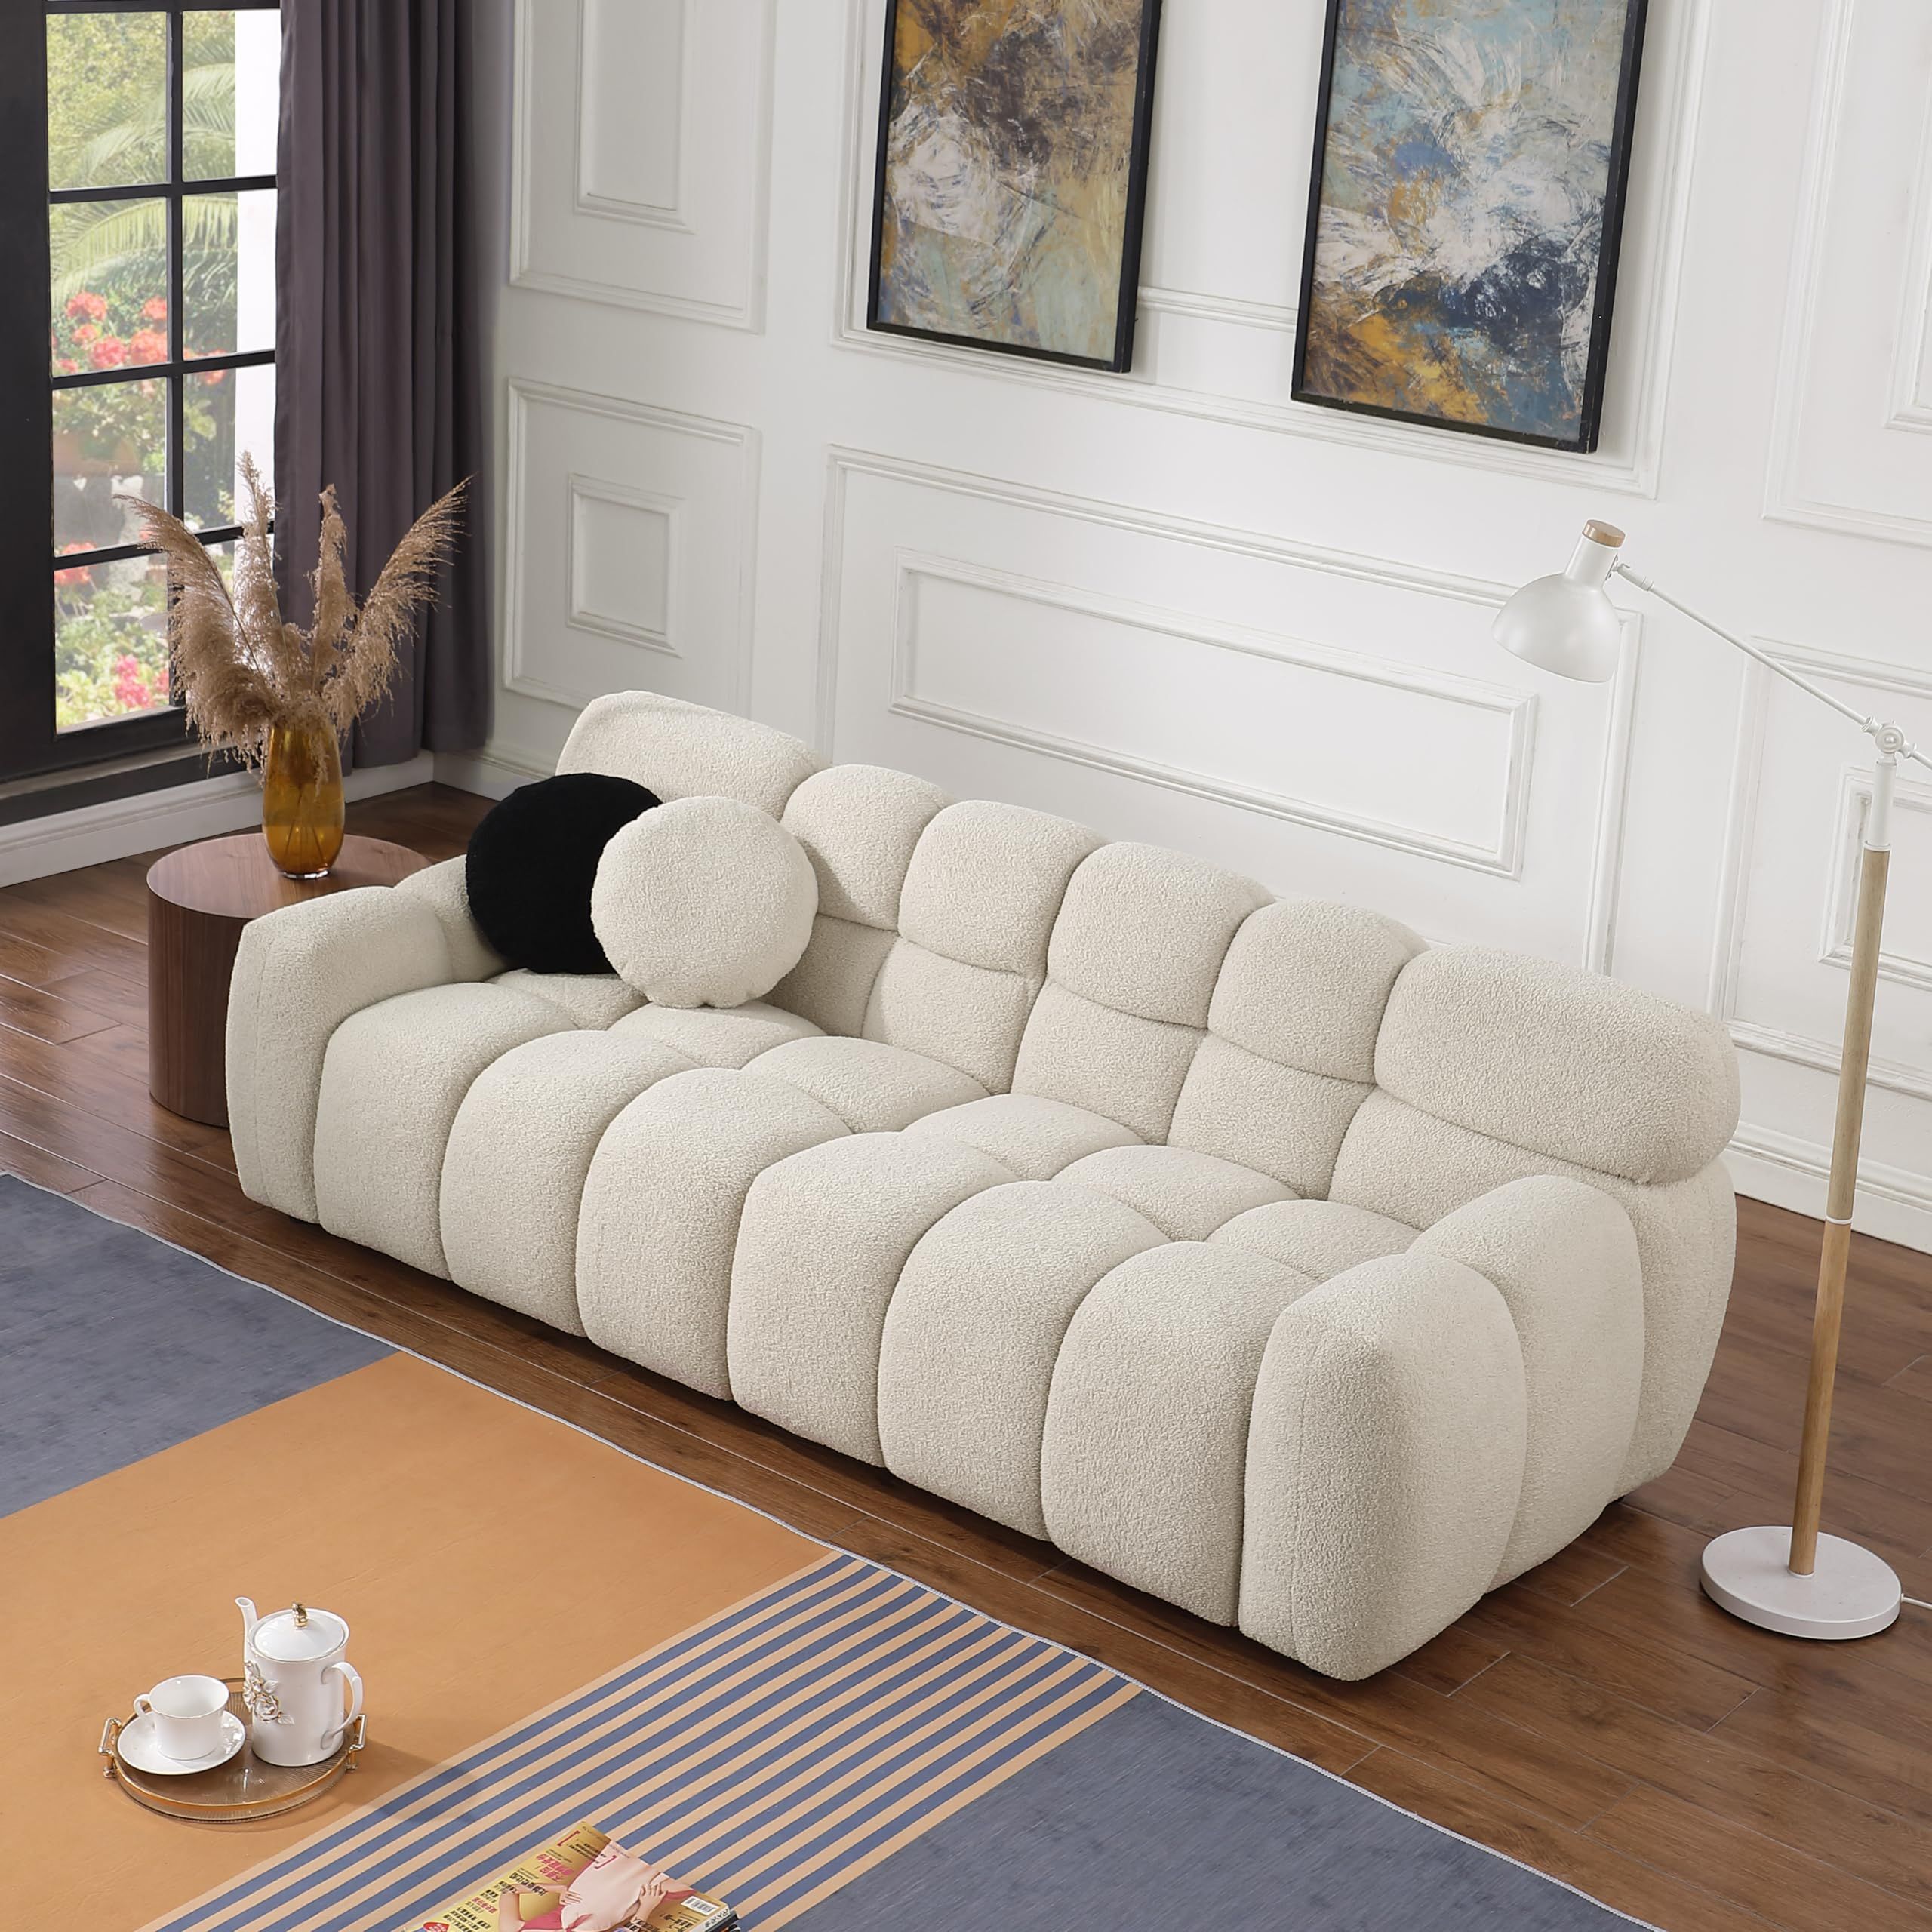 The Perfect Pair: Living Room Sofa Loveseat Set for Cozy Comfort